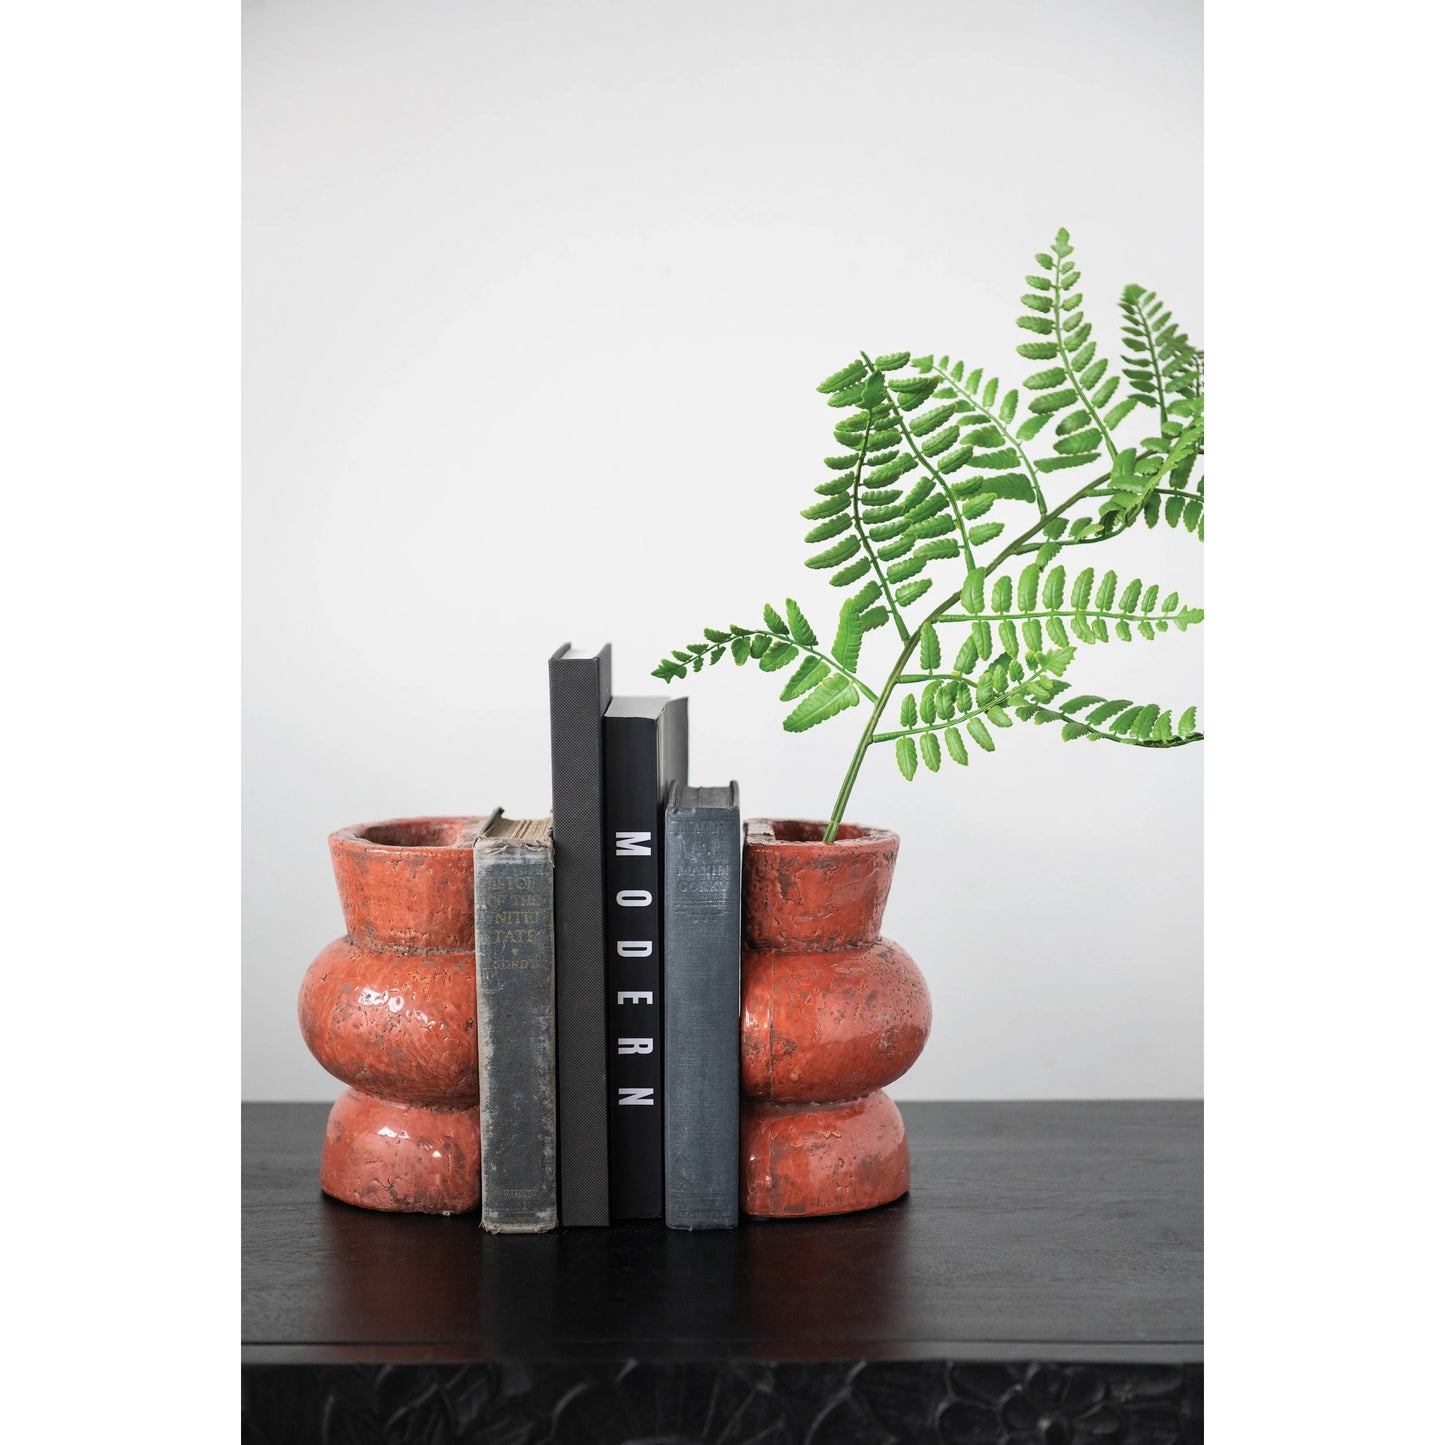 2 bookends with books between them, one bookend has a fern sten in it.